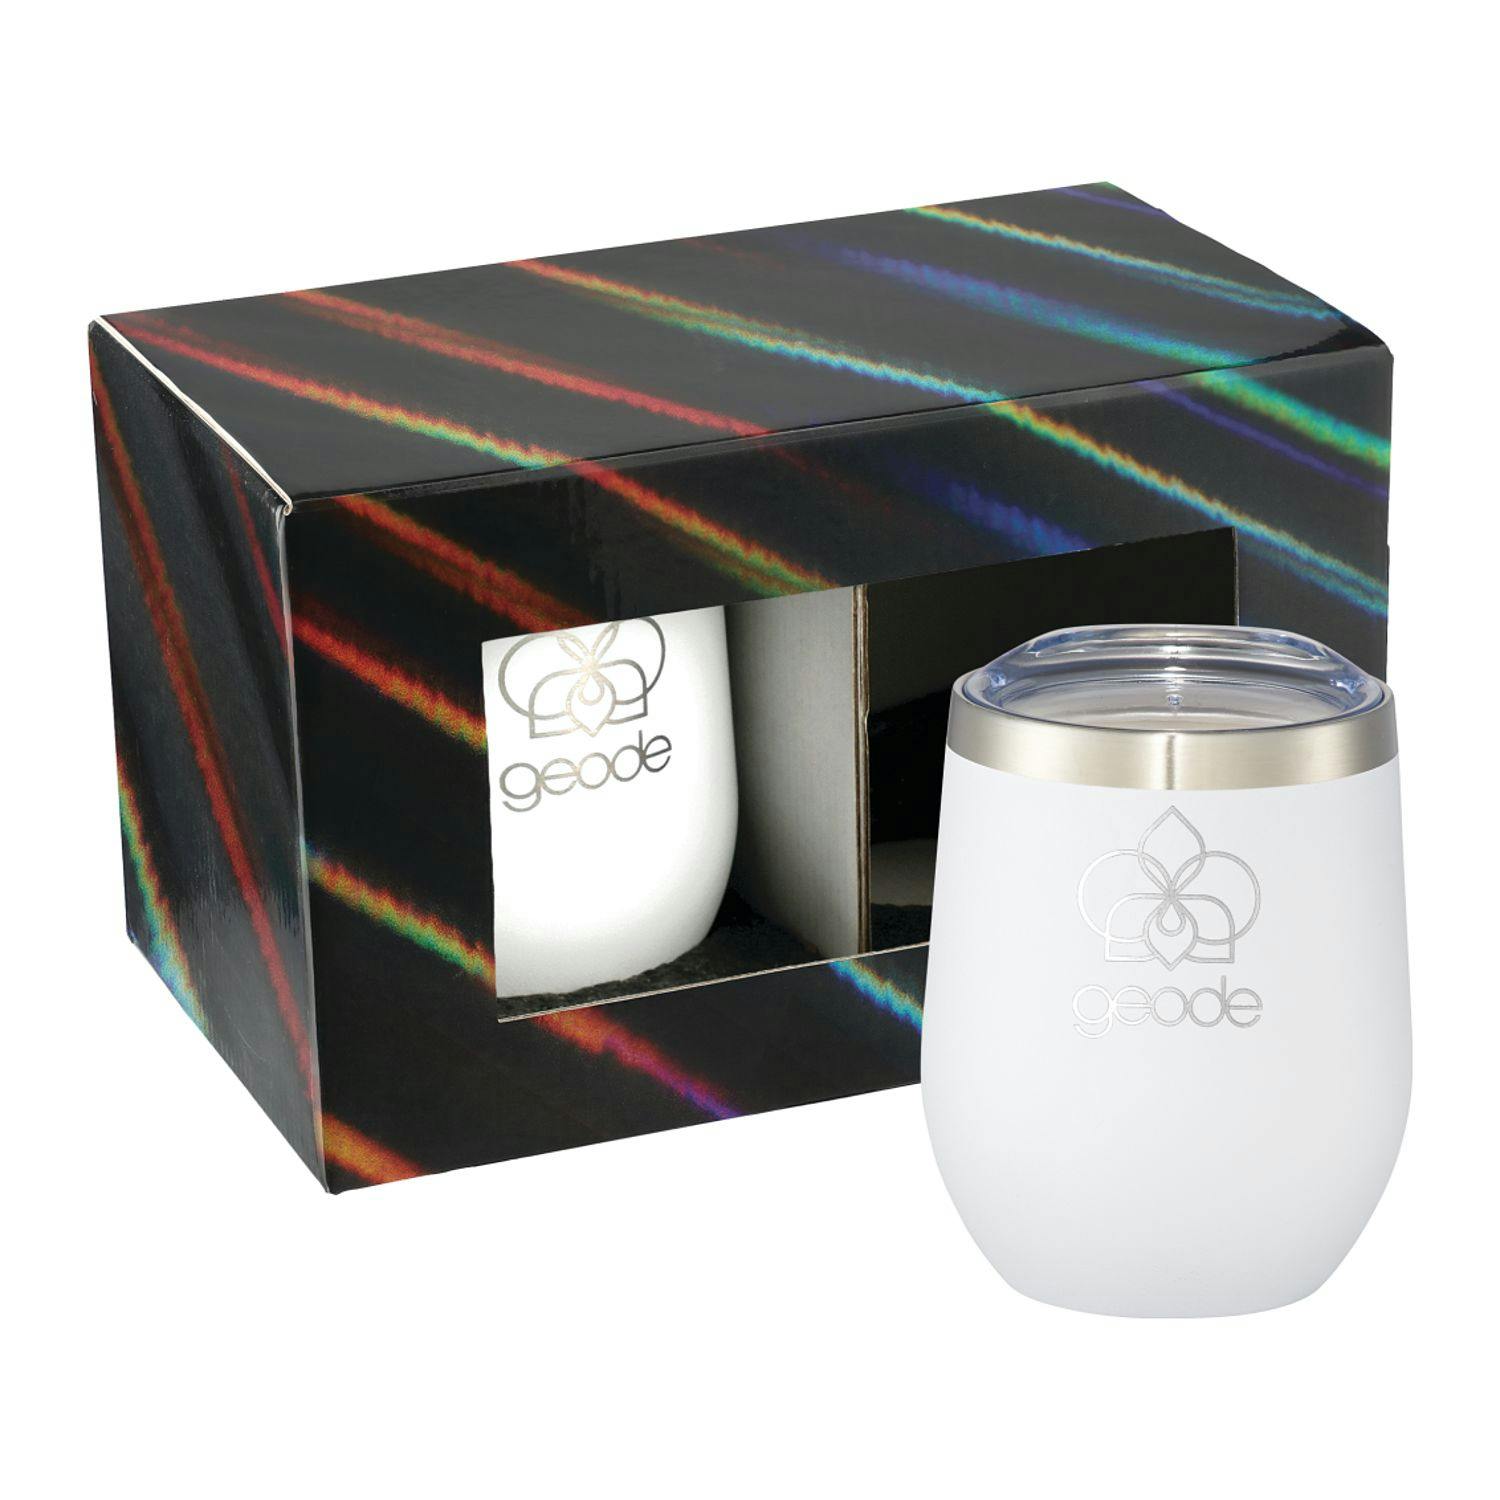 Corzo Cup 12oz 2 in 1 Gift Set - additional Image 2